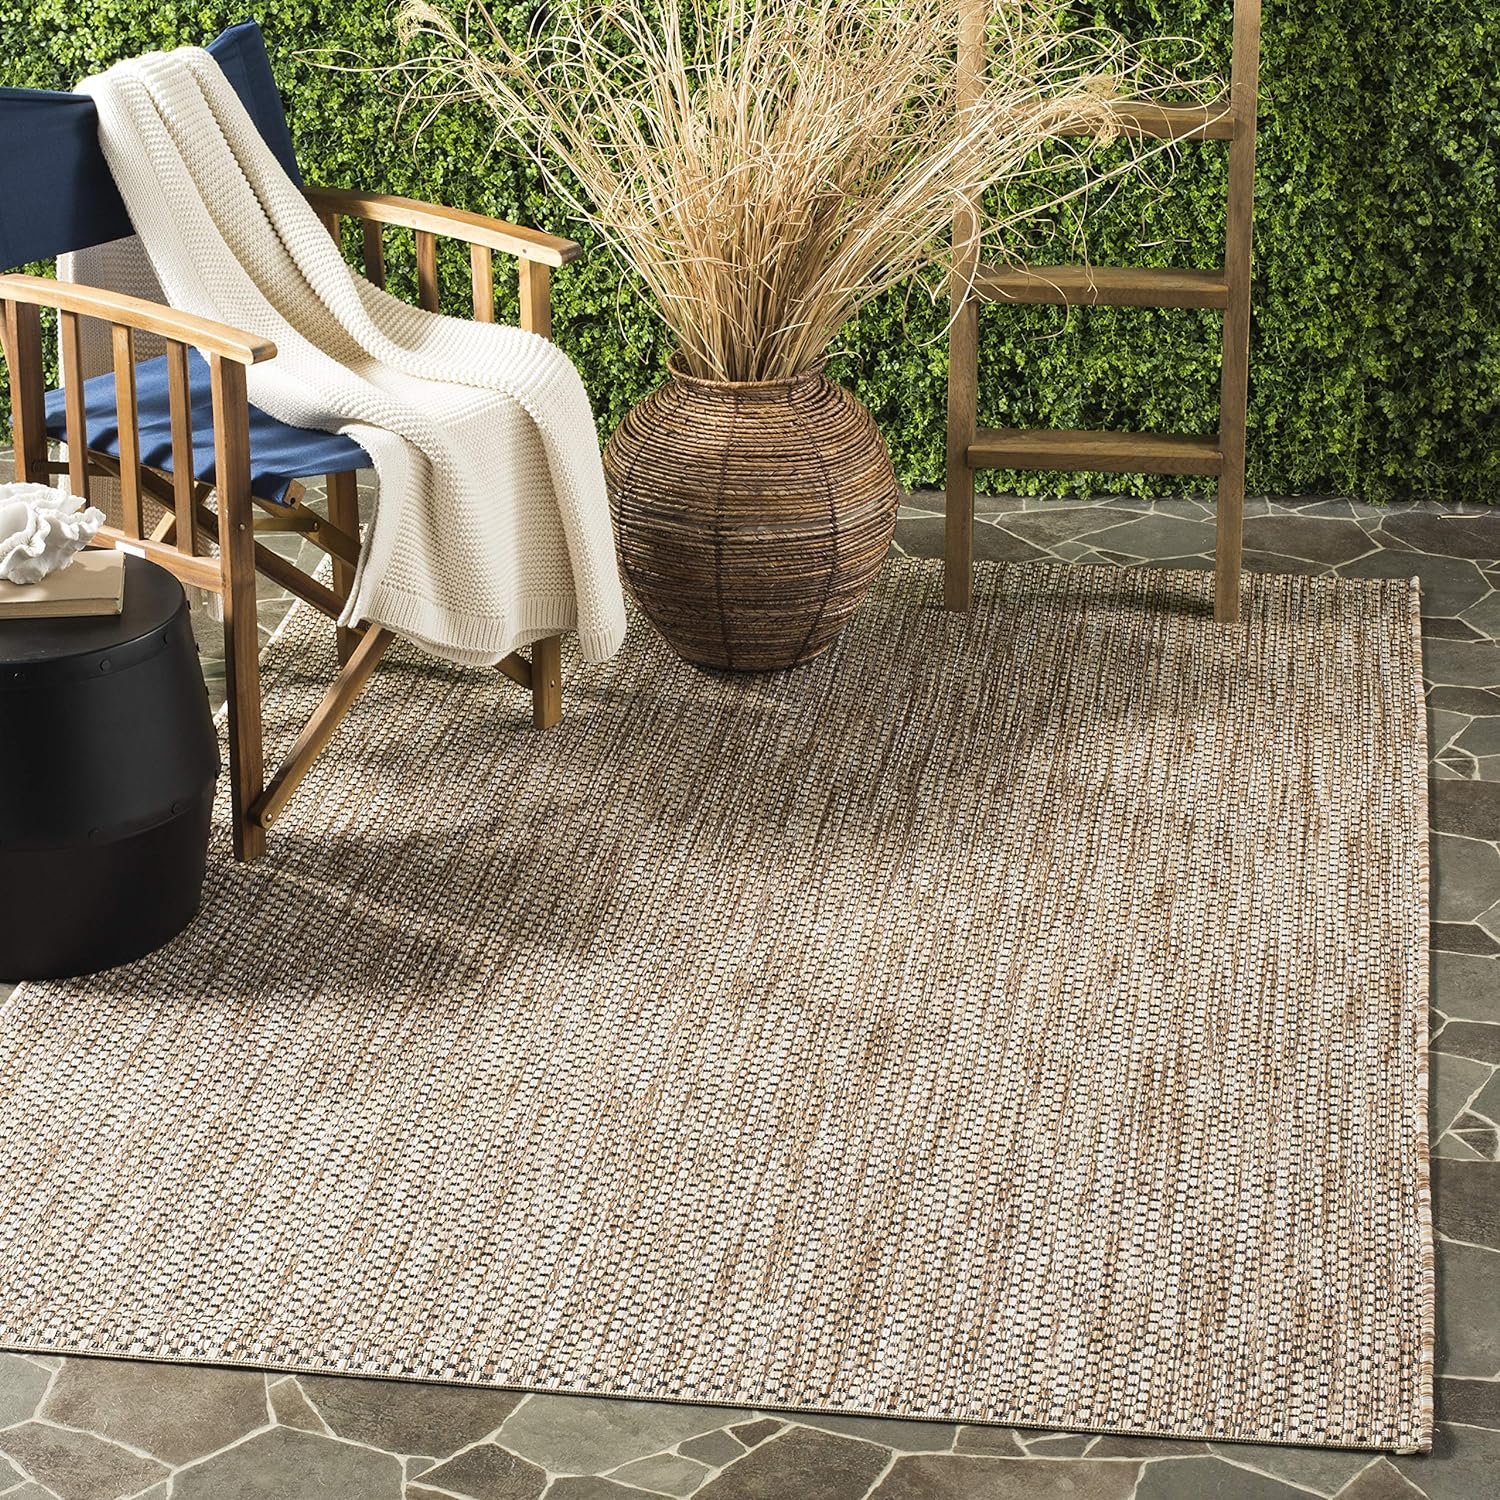 SAFAVIEH Courtyard Collection Area Rug - 53 x 77, Natural  Black, Non-Shedding  Easy Care, Indoor/Outdoor  Washable-Ideal for Patio, Backyard, Mudroom (CY8521-37312)